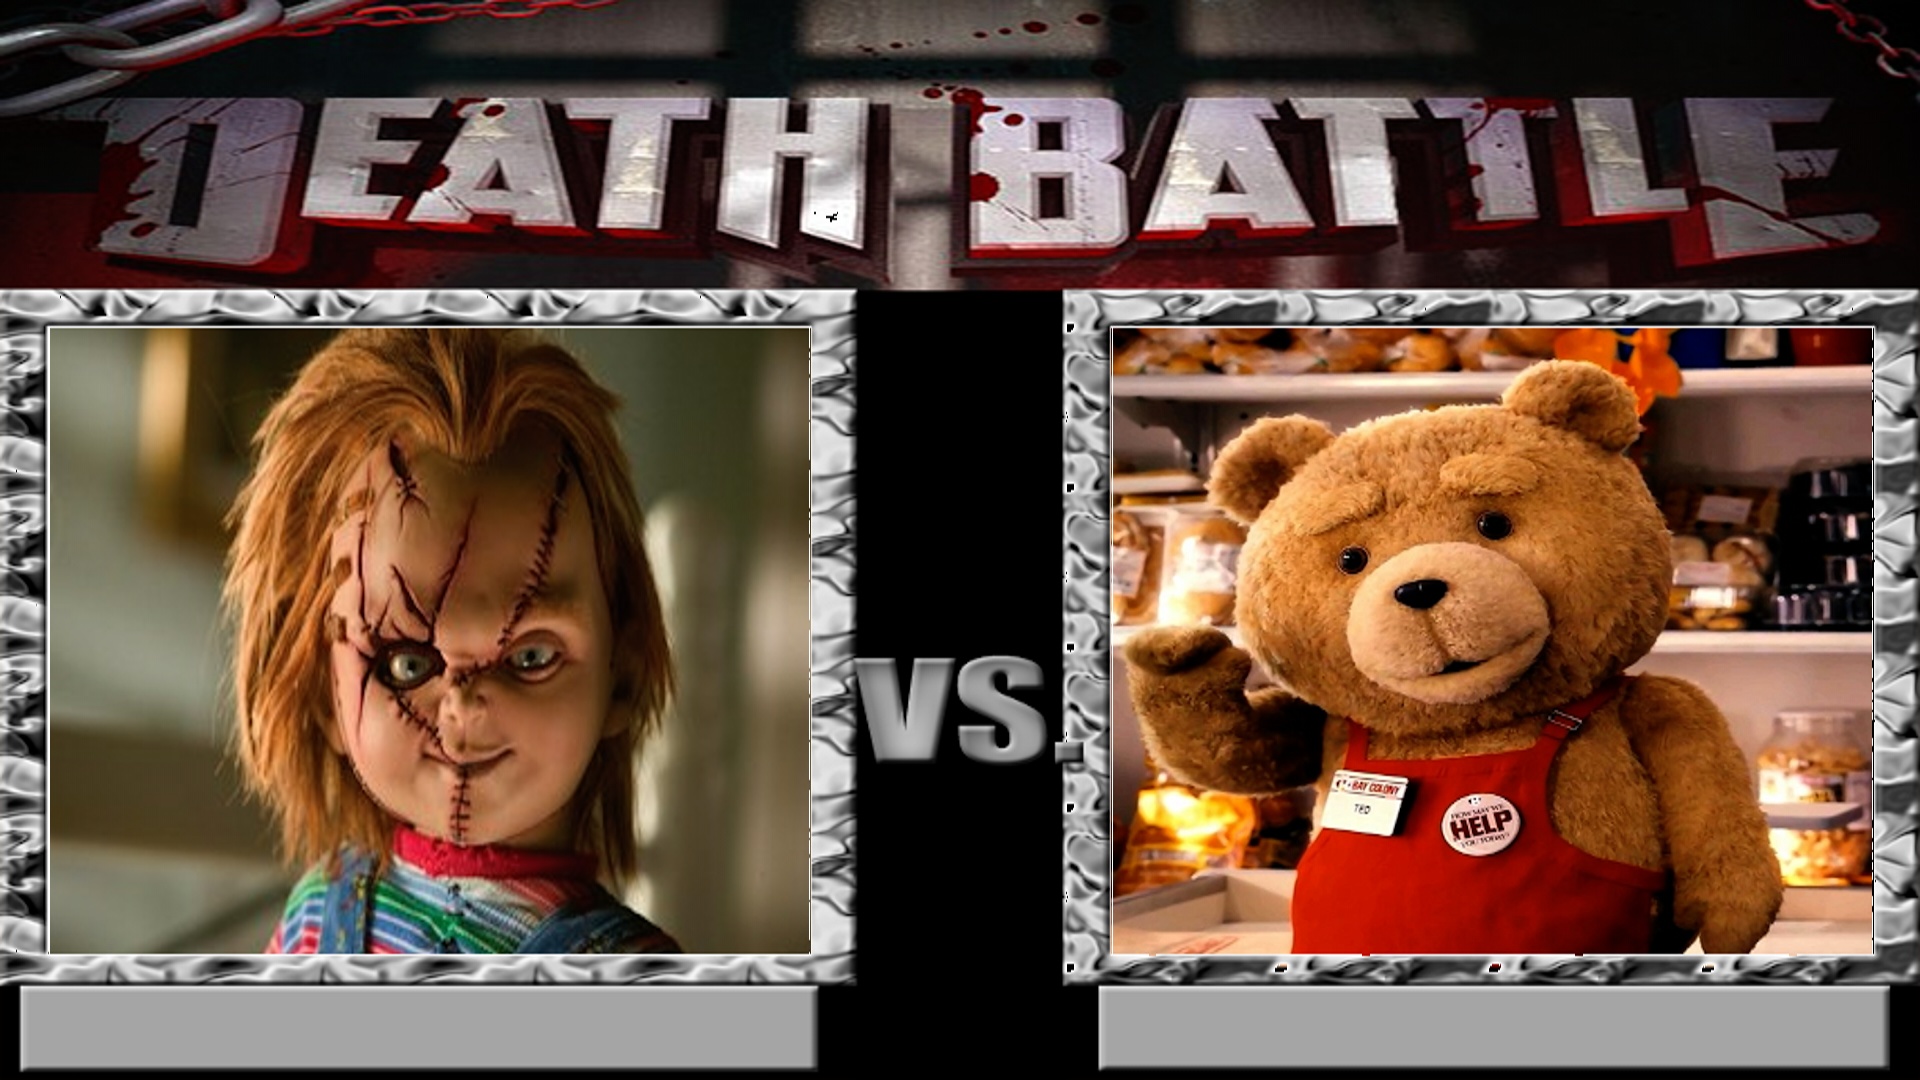 chucky_vs_ted_by_normanjokerwise-d5zgj1a